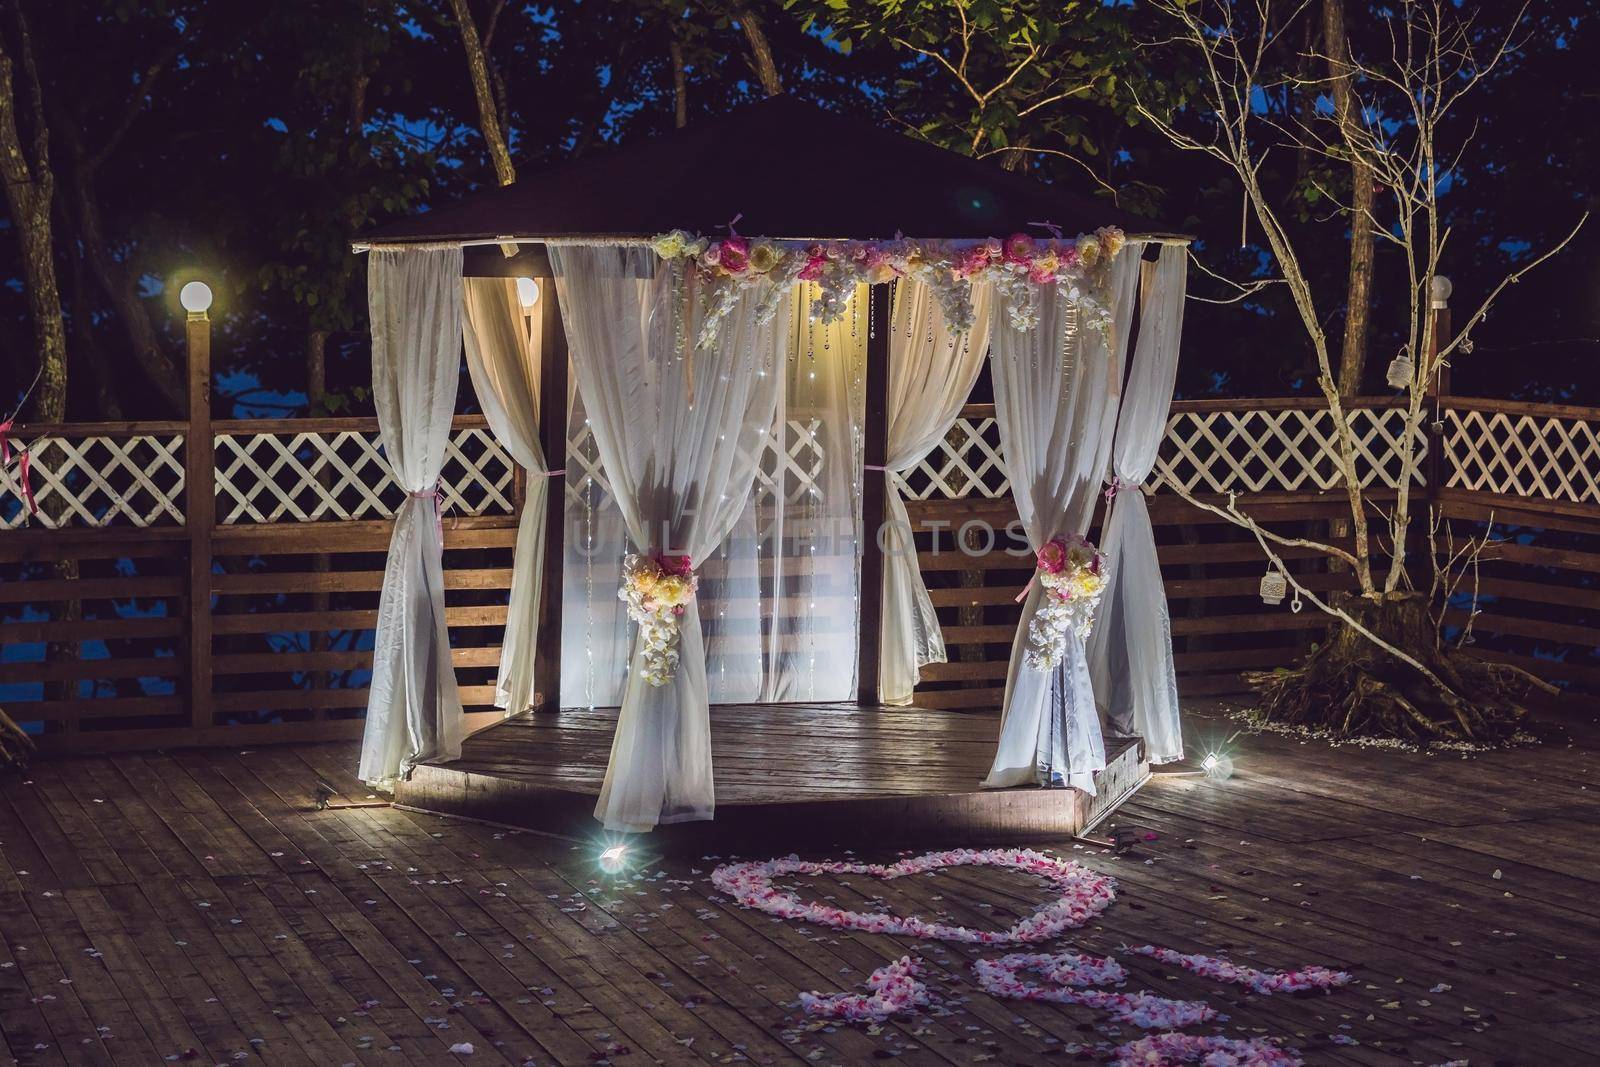 Night wedding ceremony. Decorations for wedding ceremony arch and lamps in the night forest.